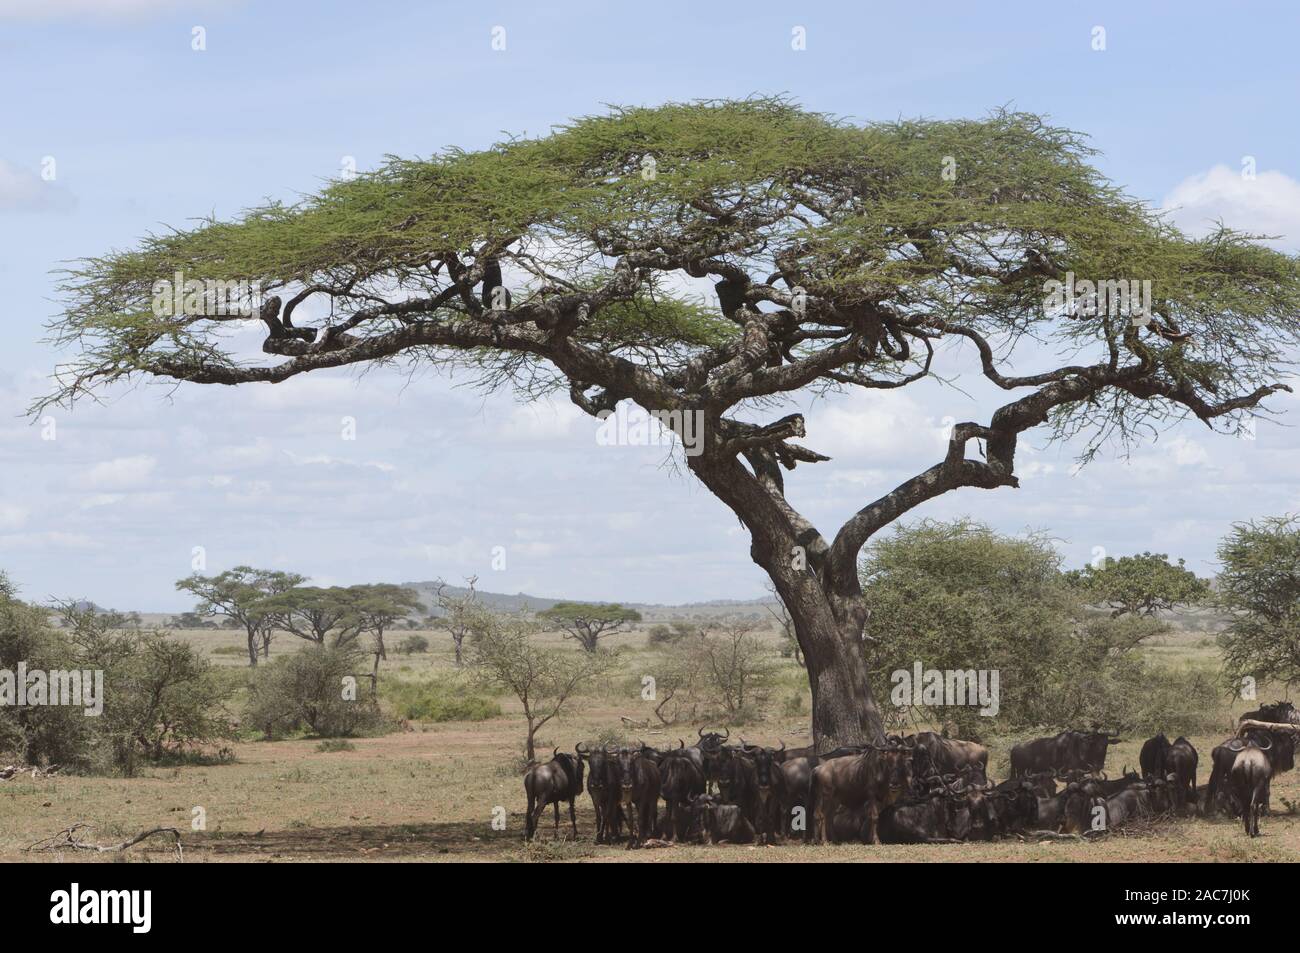 Blue wildebeest (Connochaetes taurinus) shelter from the midday sun in the shade under an acacia tree. Serengeti National Park, Tanzania. Stock Photo